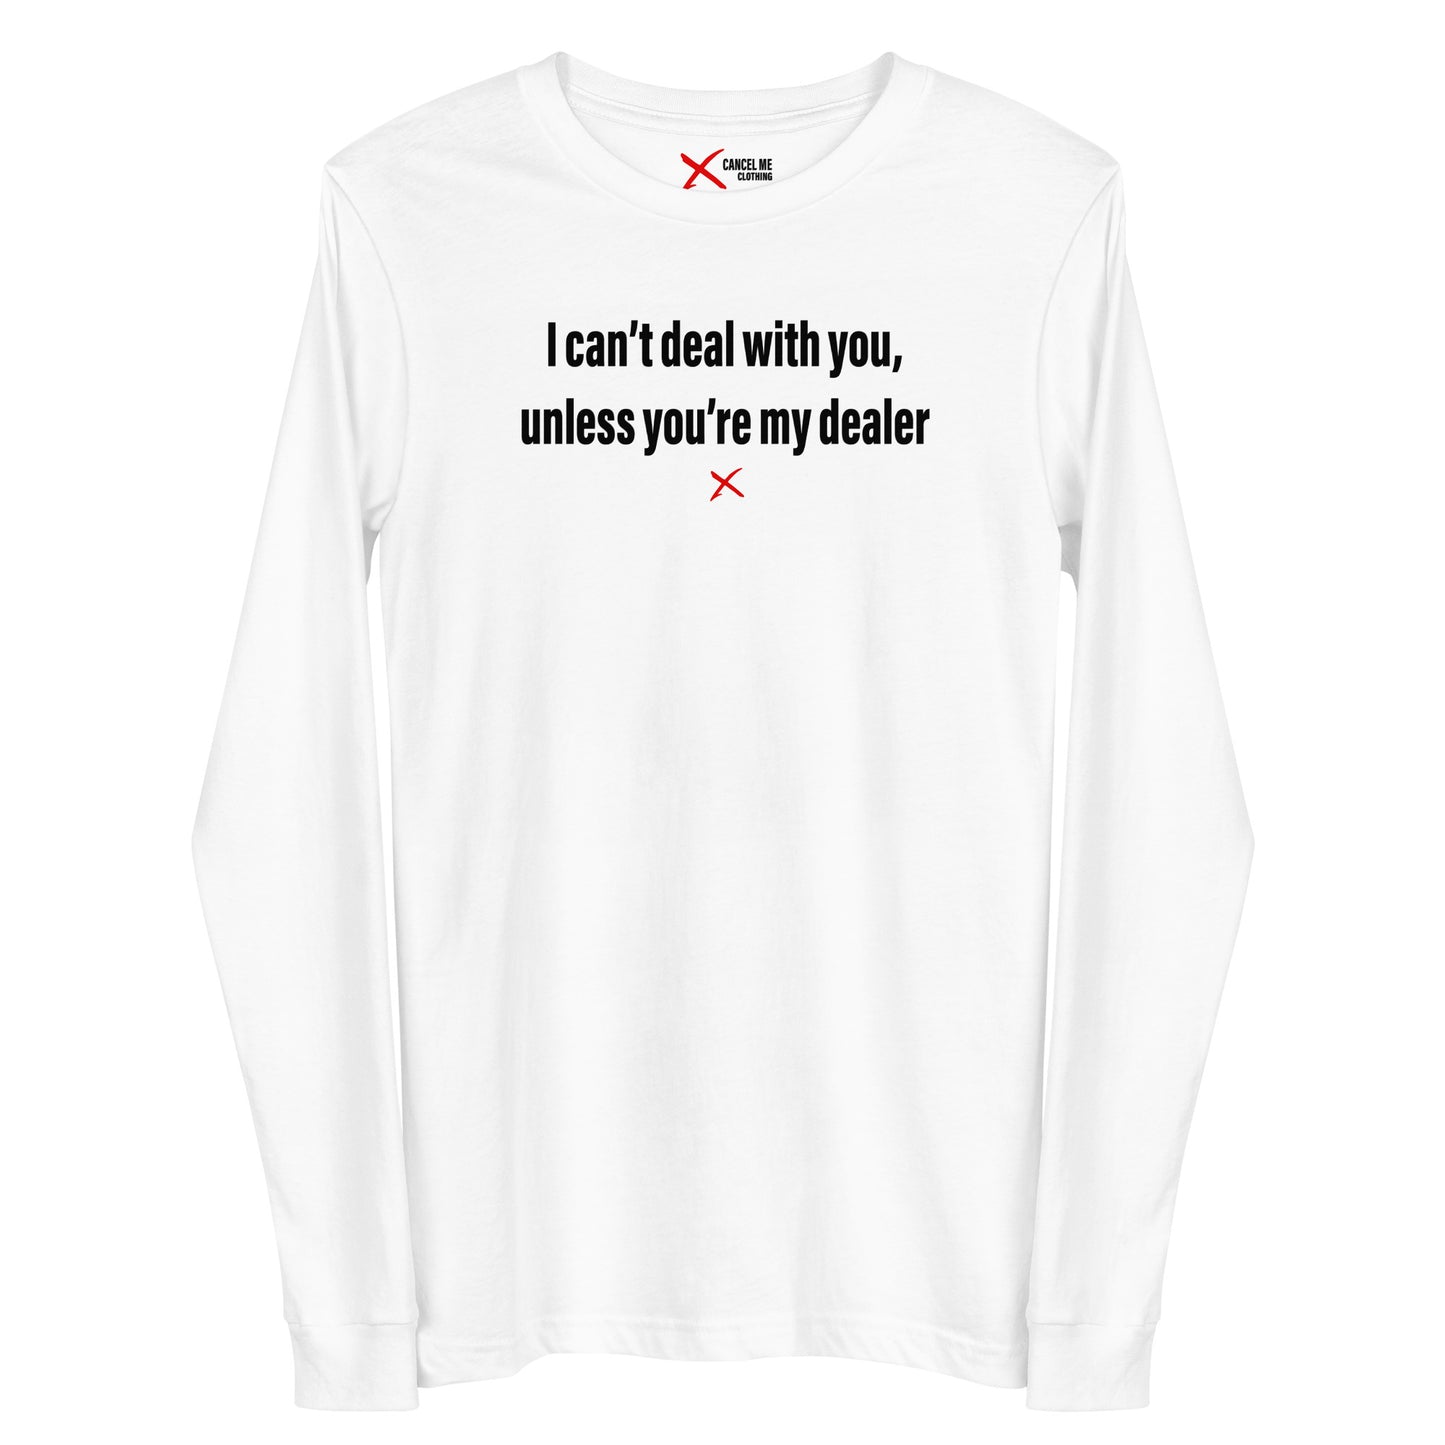 I can't deal with you, unless you're my dealer - Longsleeve